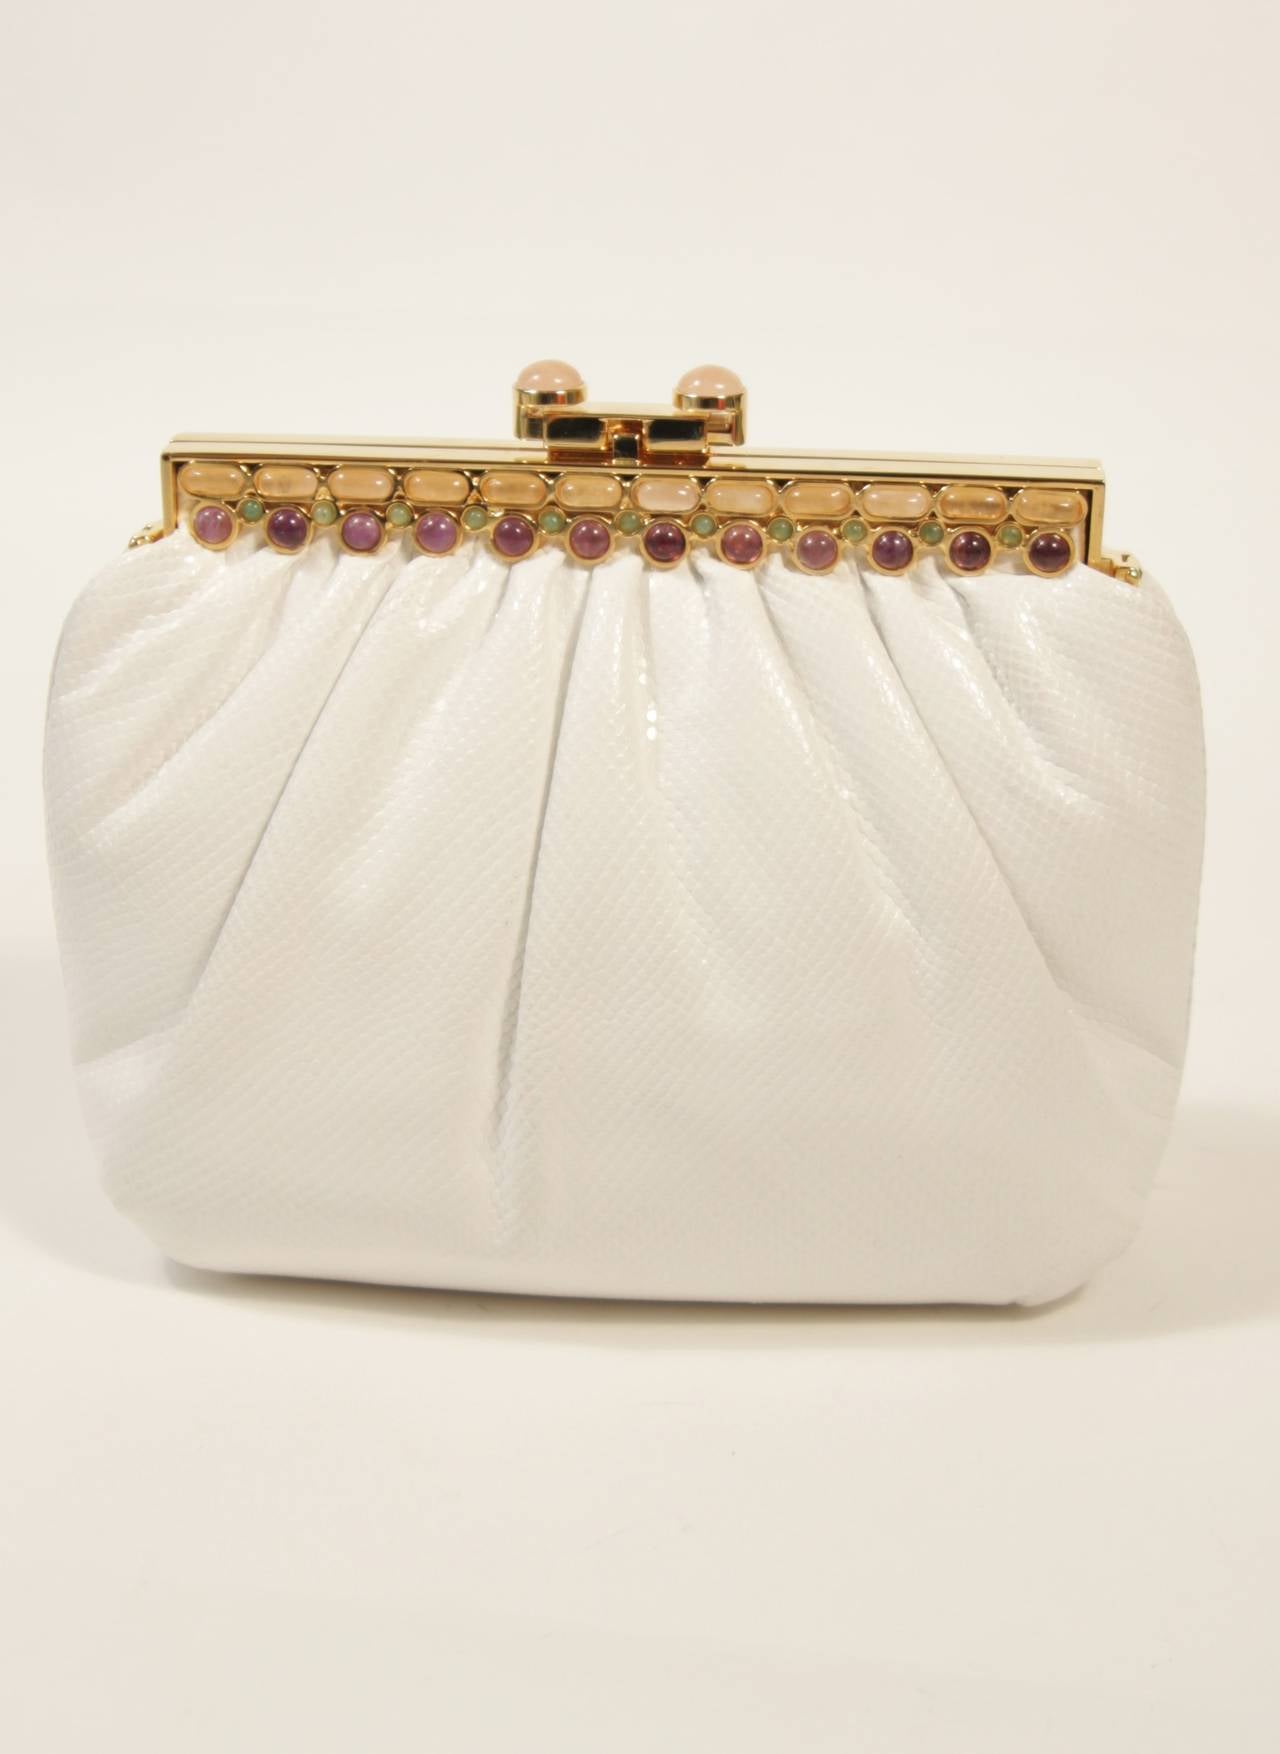 Judith Leiber Gathered White Lizard Purse with Multi-Stone Gold Frame 2